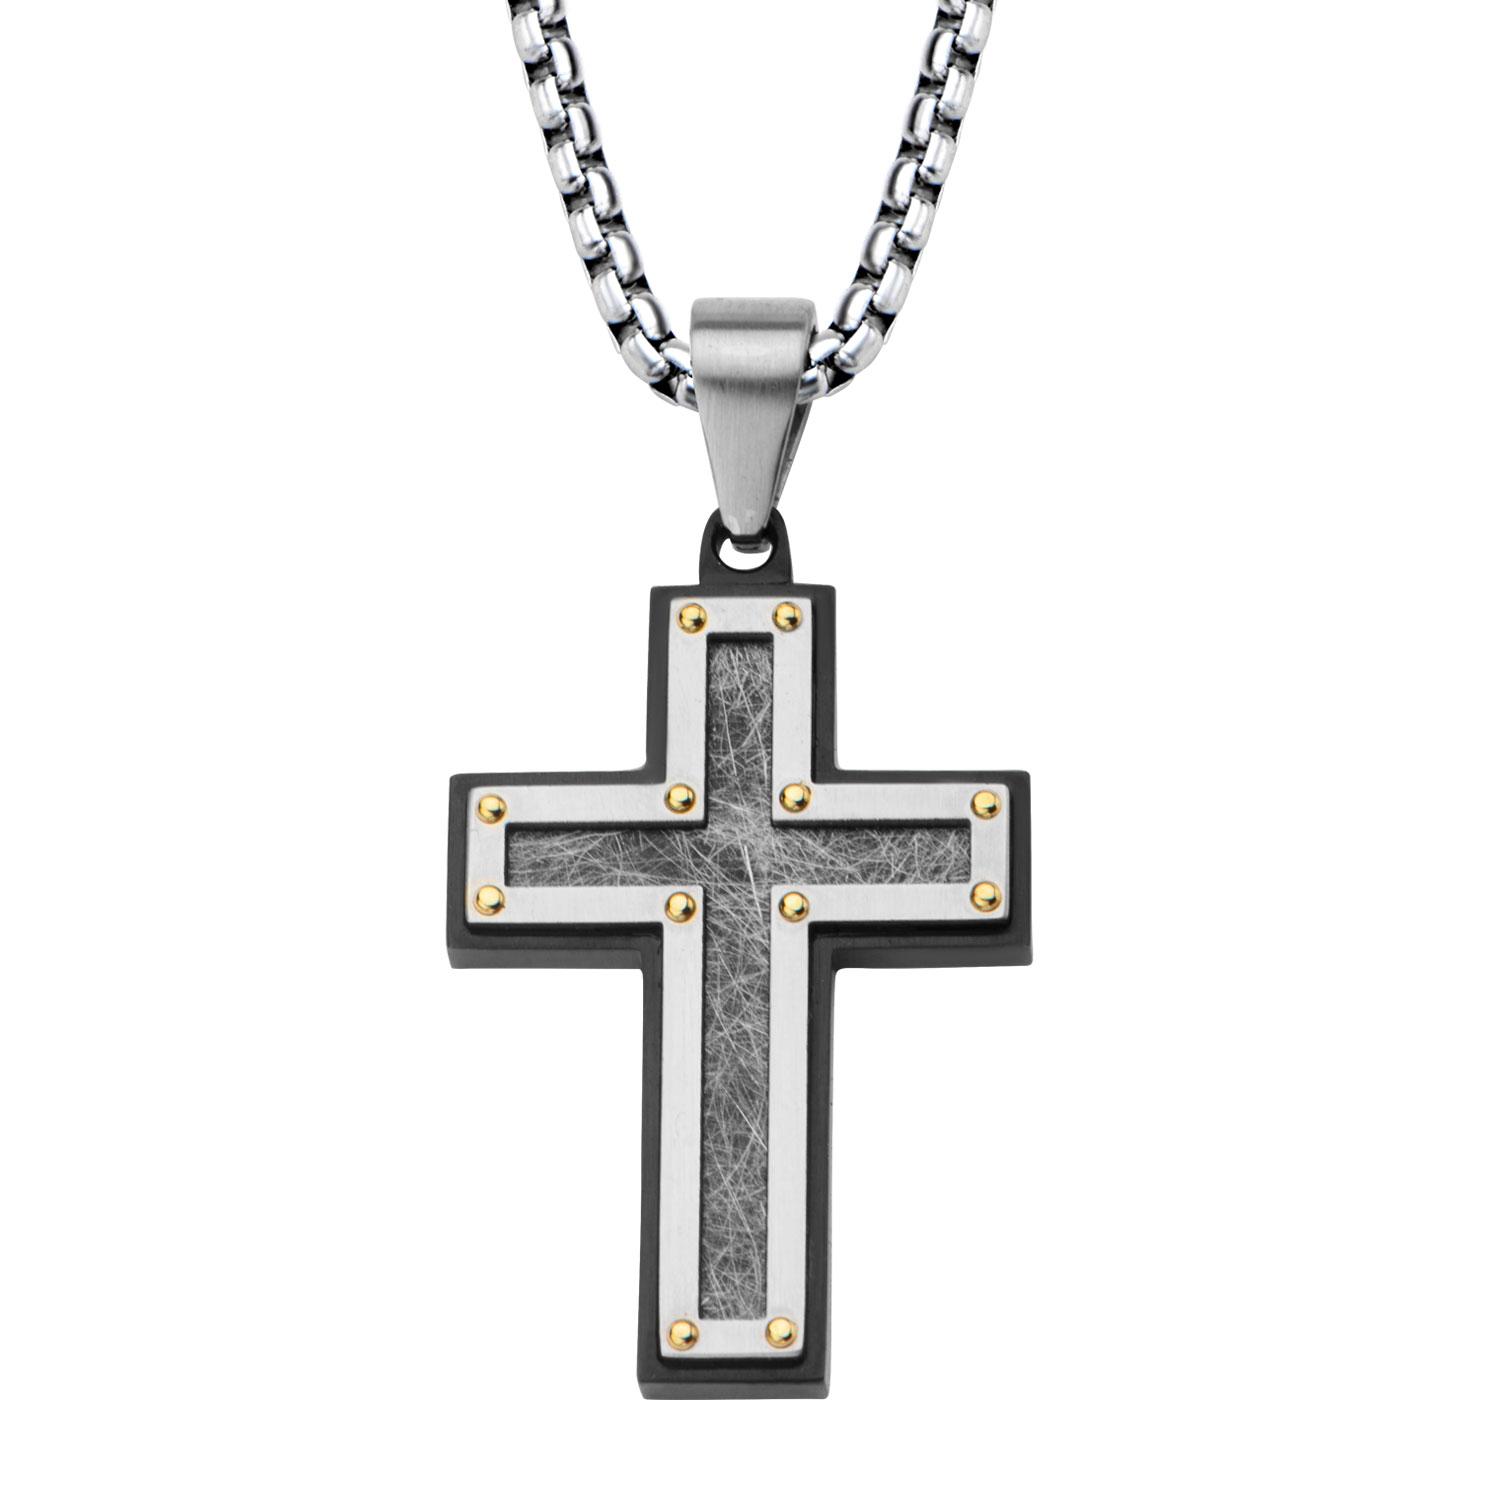 Textured Black Plated Cross Pendant with Chain Morin Jewelers Southbridge, MA